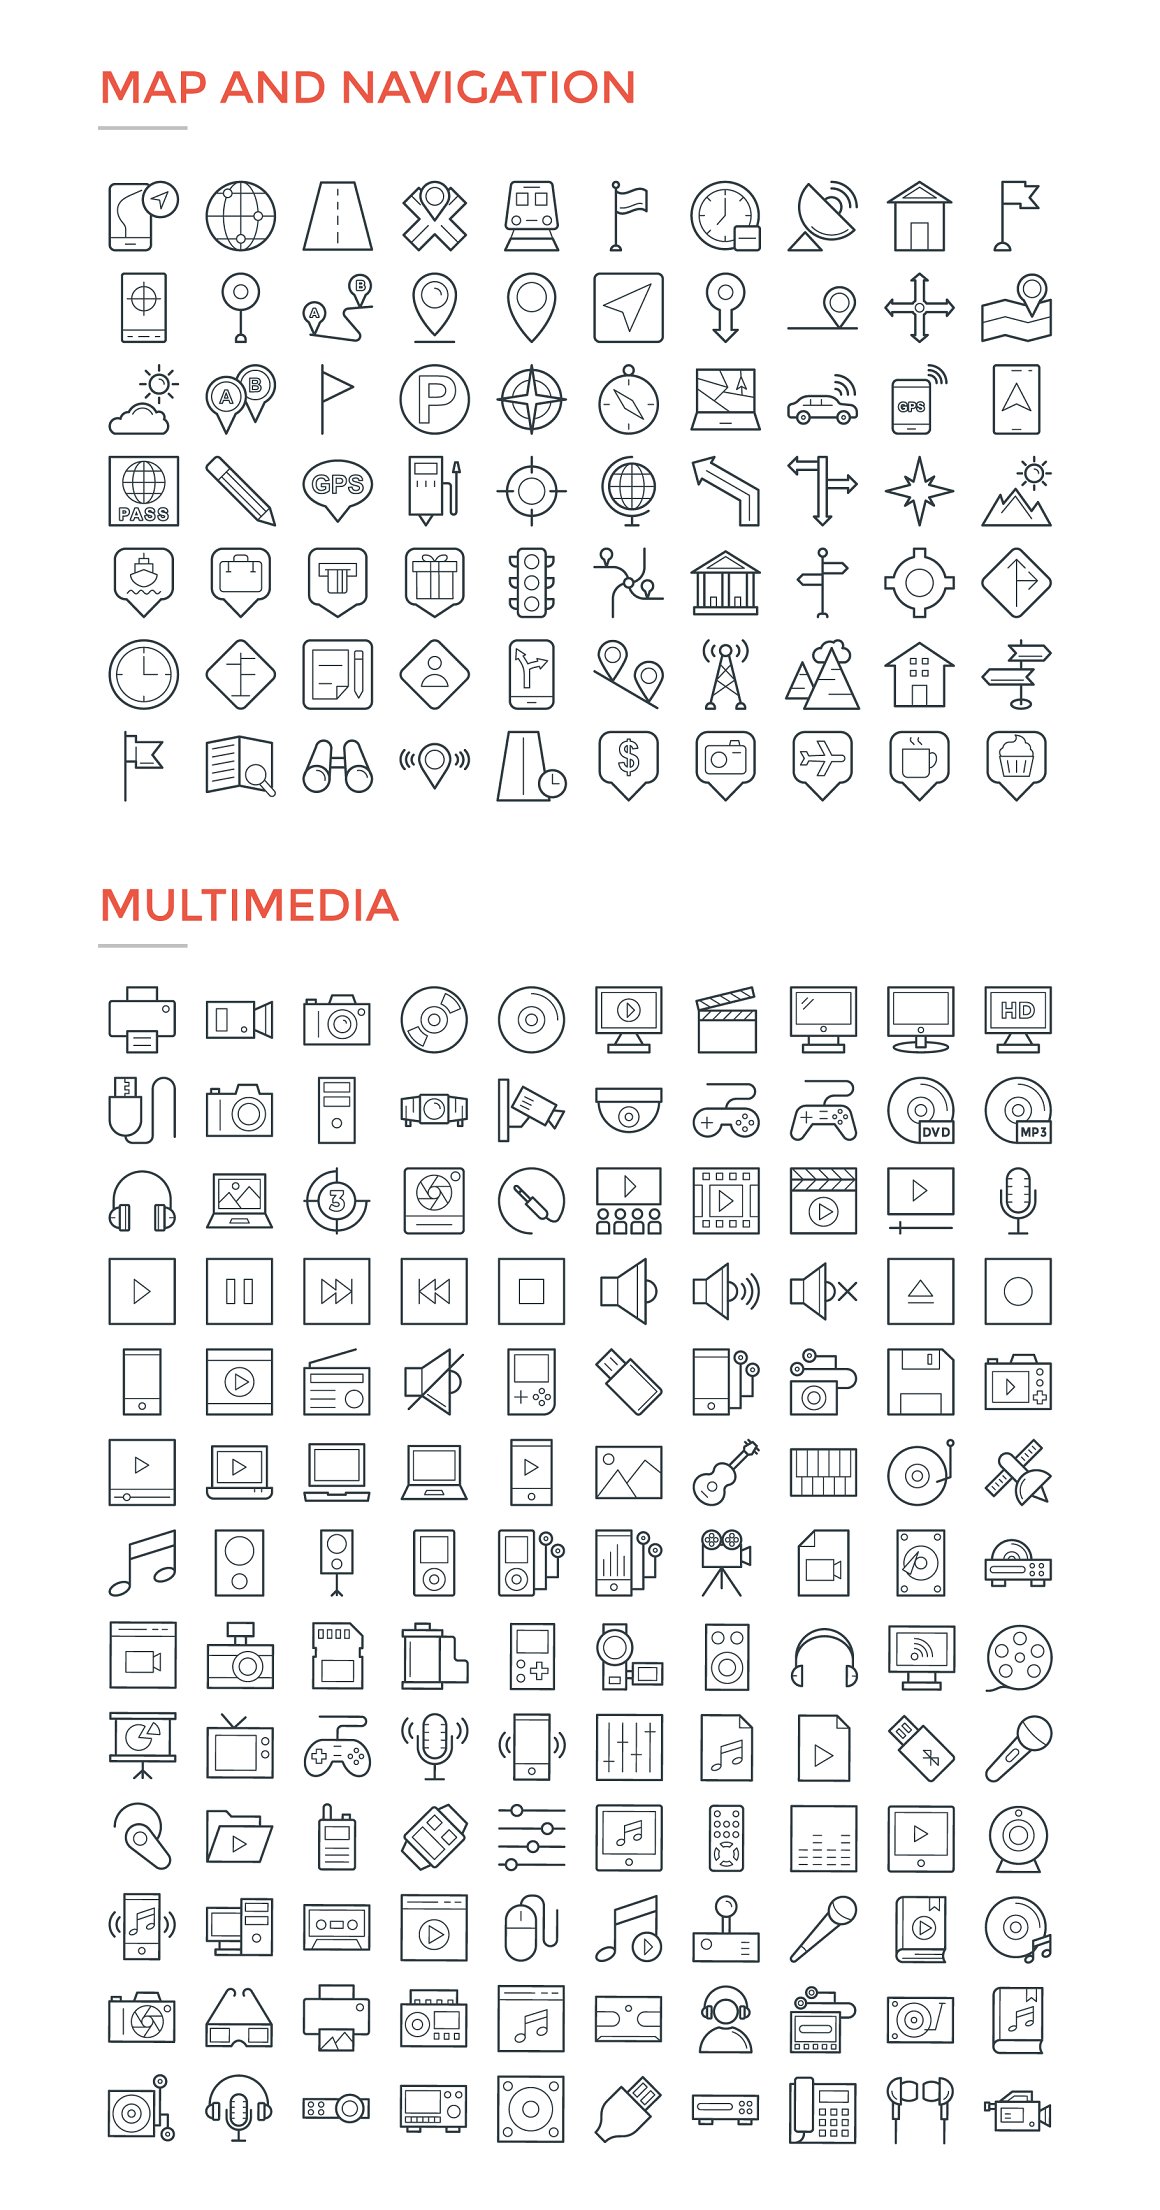 Clipart of black different map & navigation and multimedia icons on a white background.